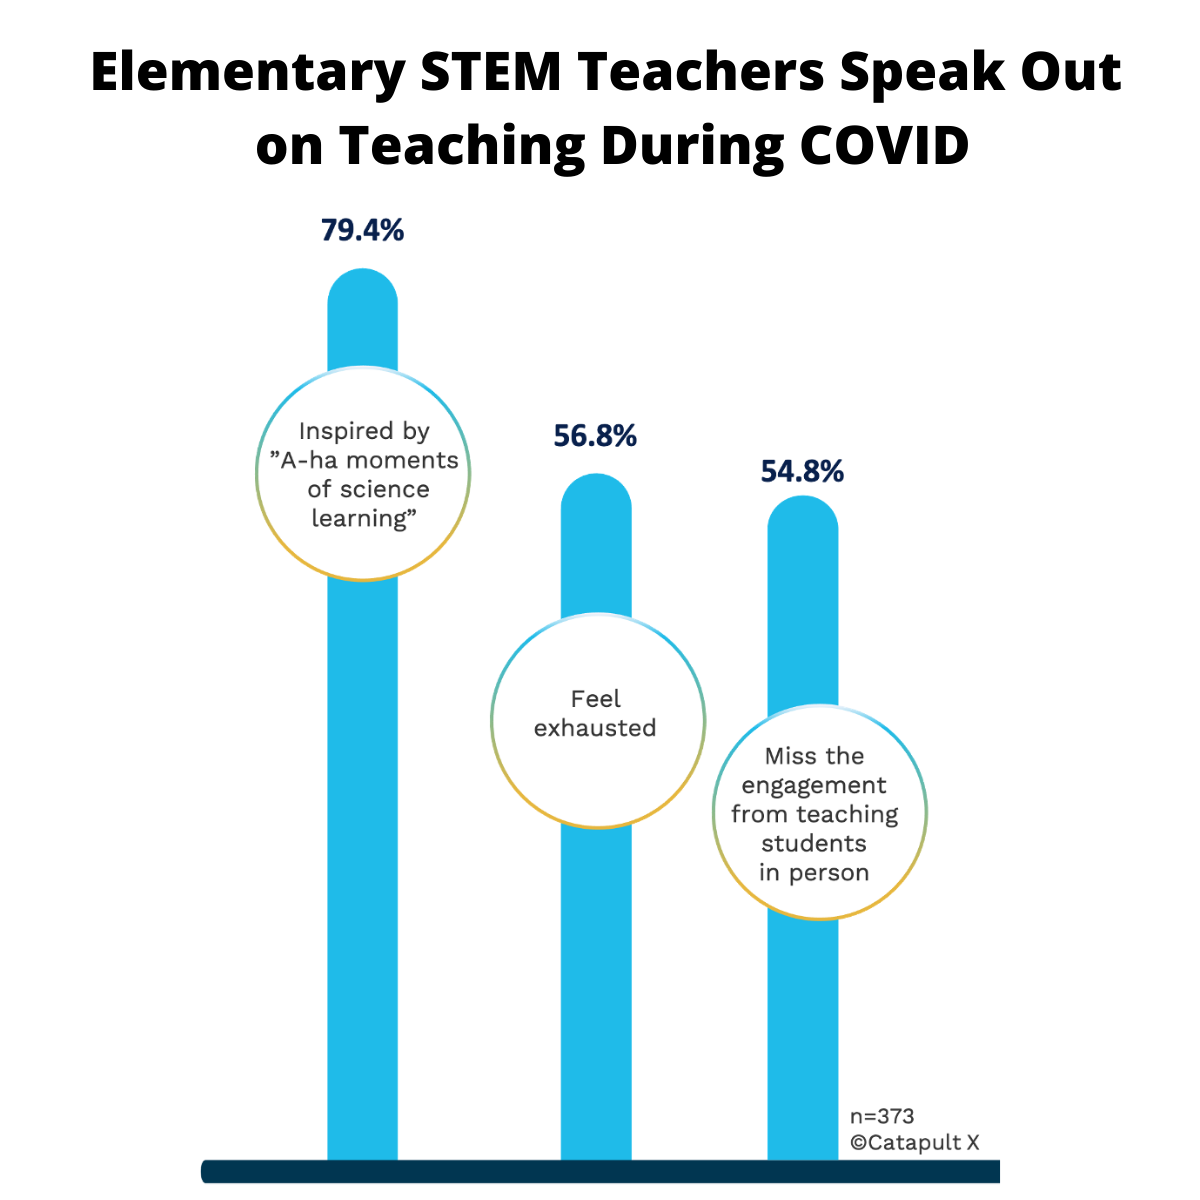 Bar graph shows 79.4% of STEM educators grades 3-5 are inspired by students' "a-ha" moments of science learning; 56.8% feel exhausted, 54.8% miss the engagement from teaching students in person.